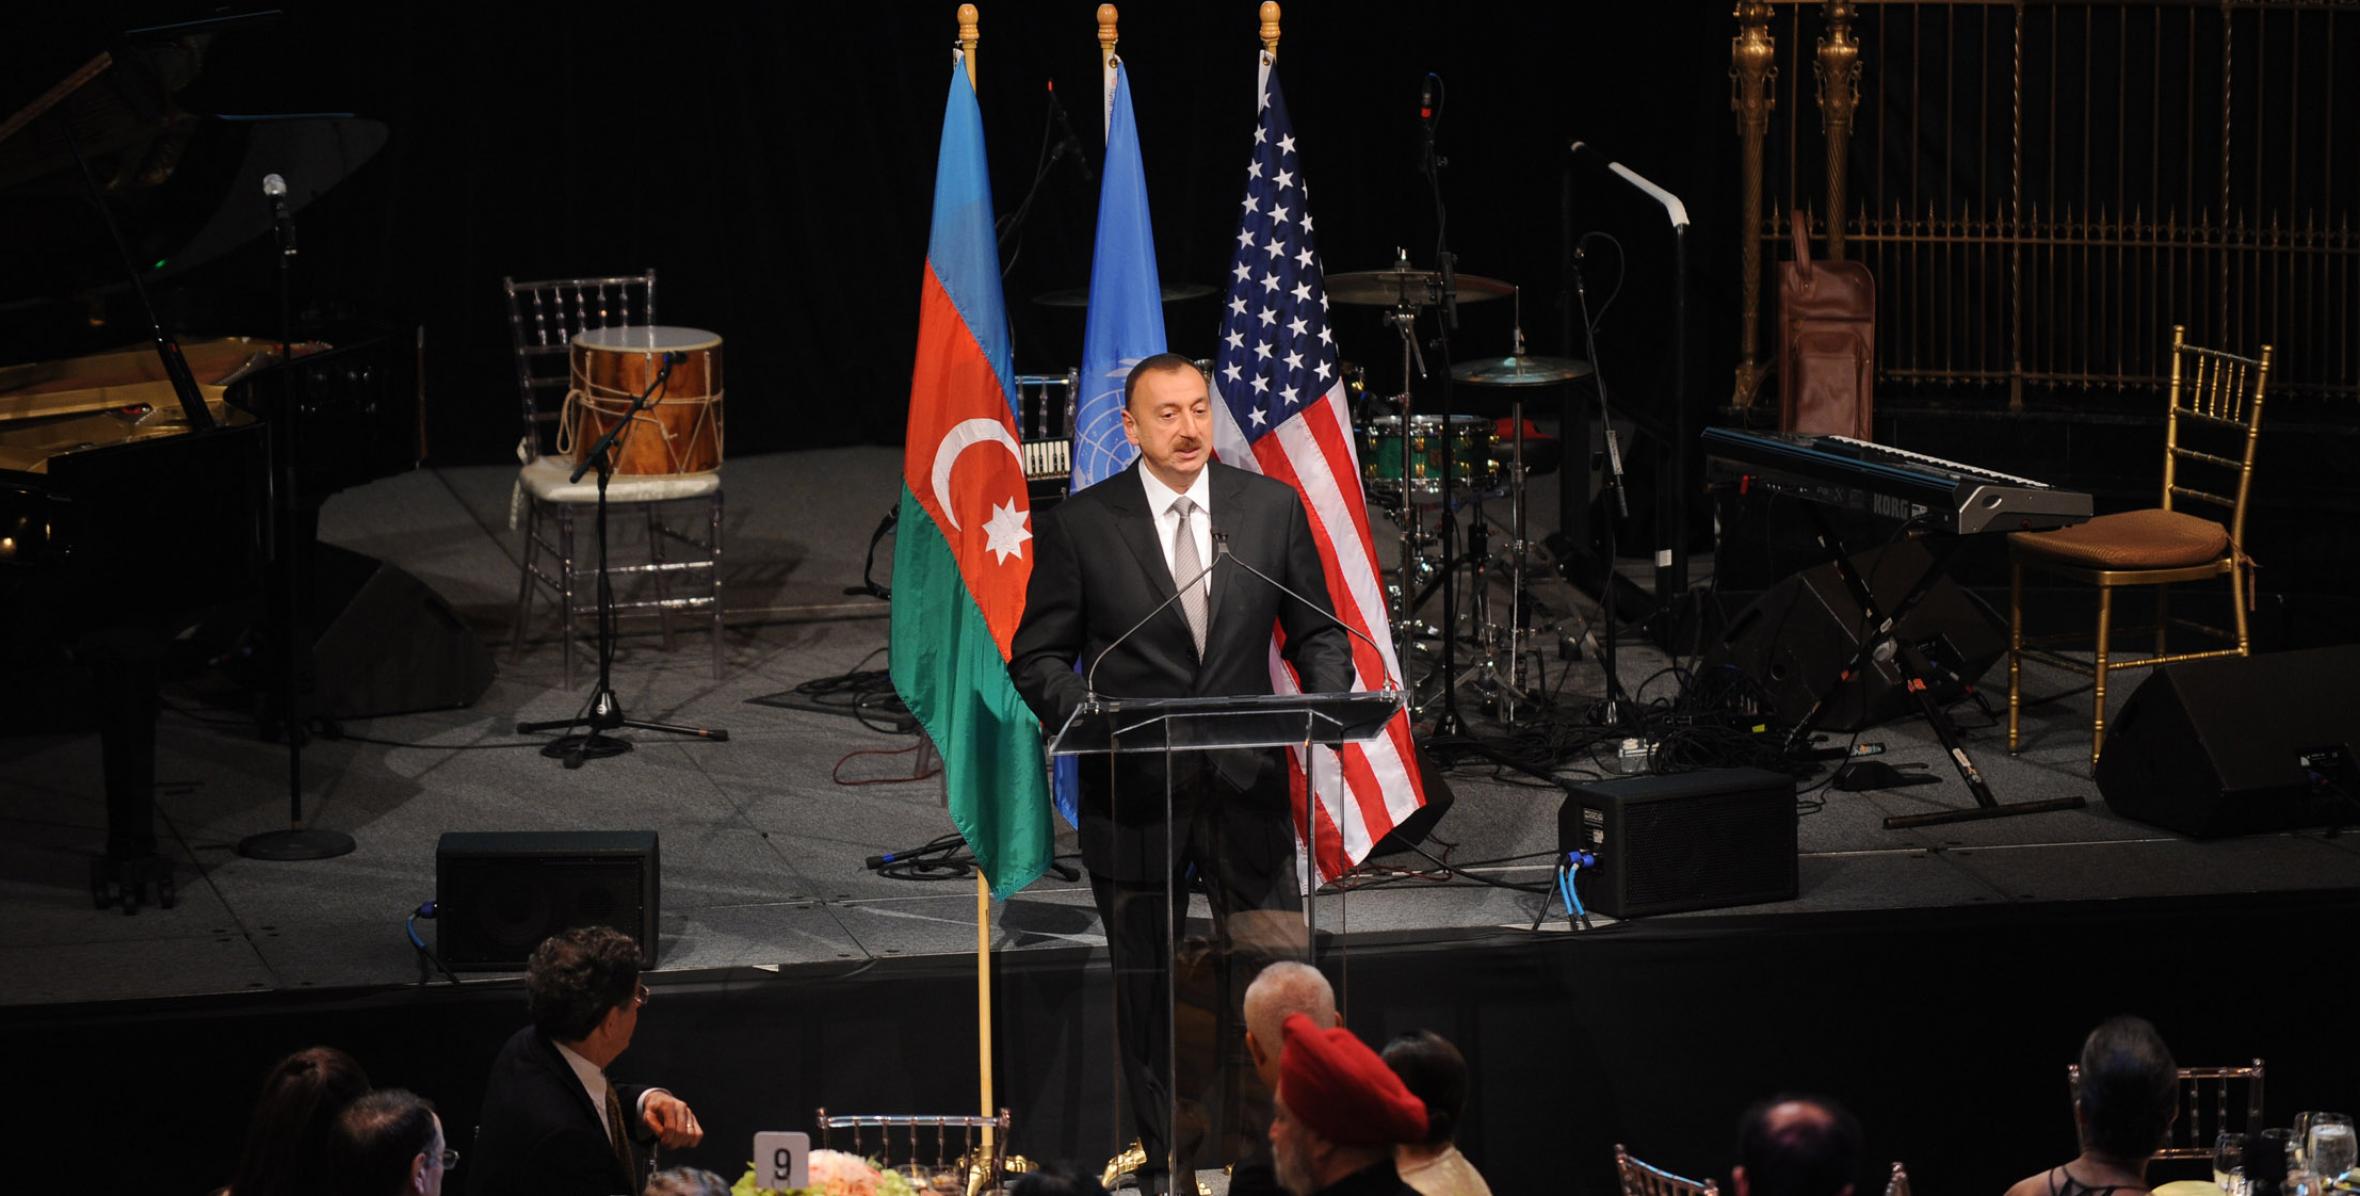 Working visit of Ilham Aliyev to the United States of America